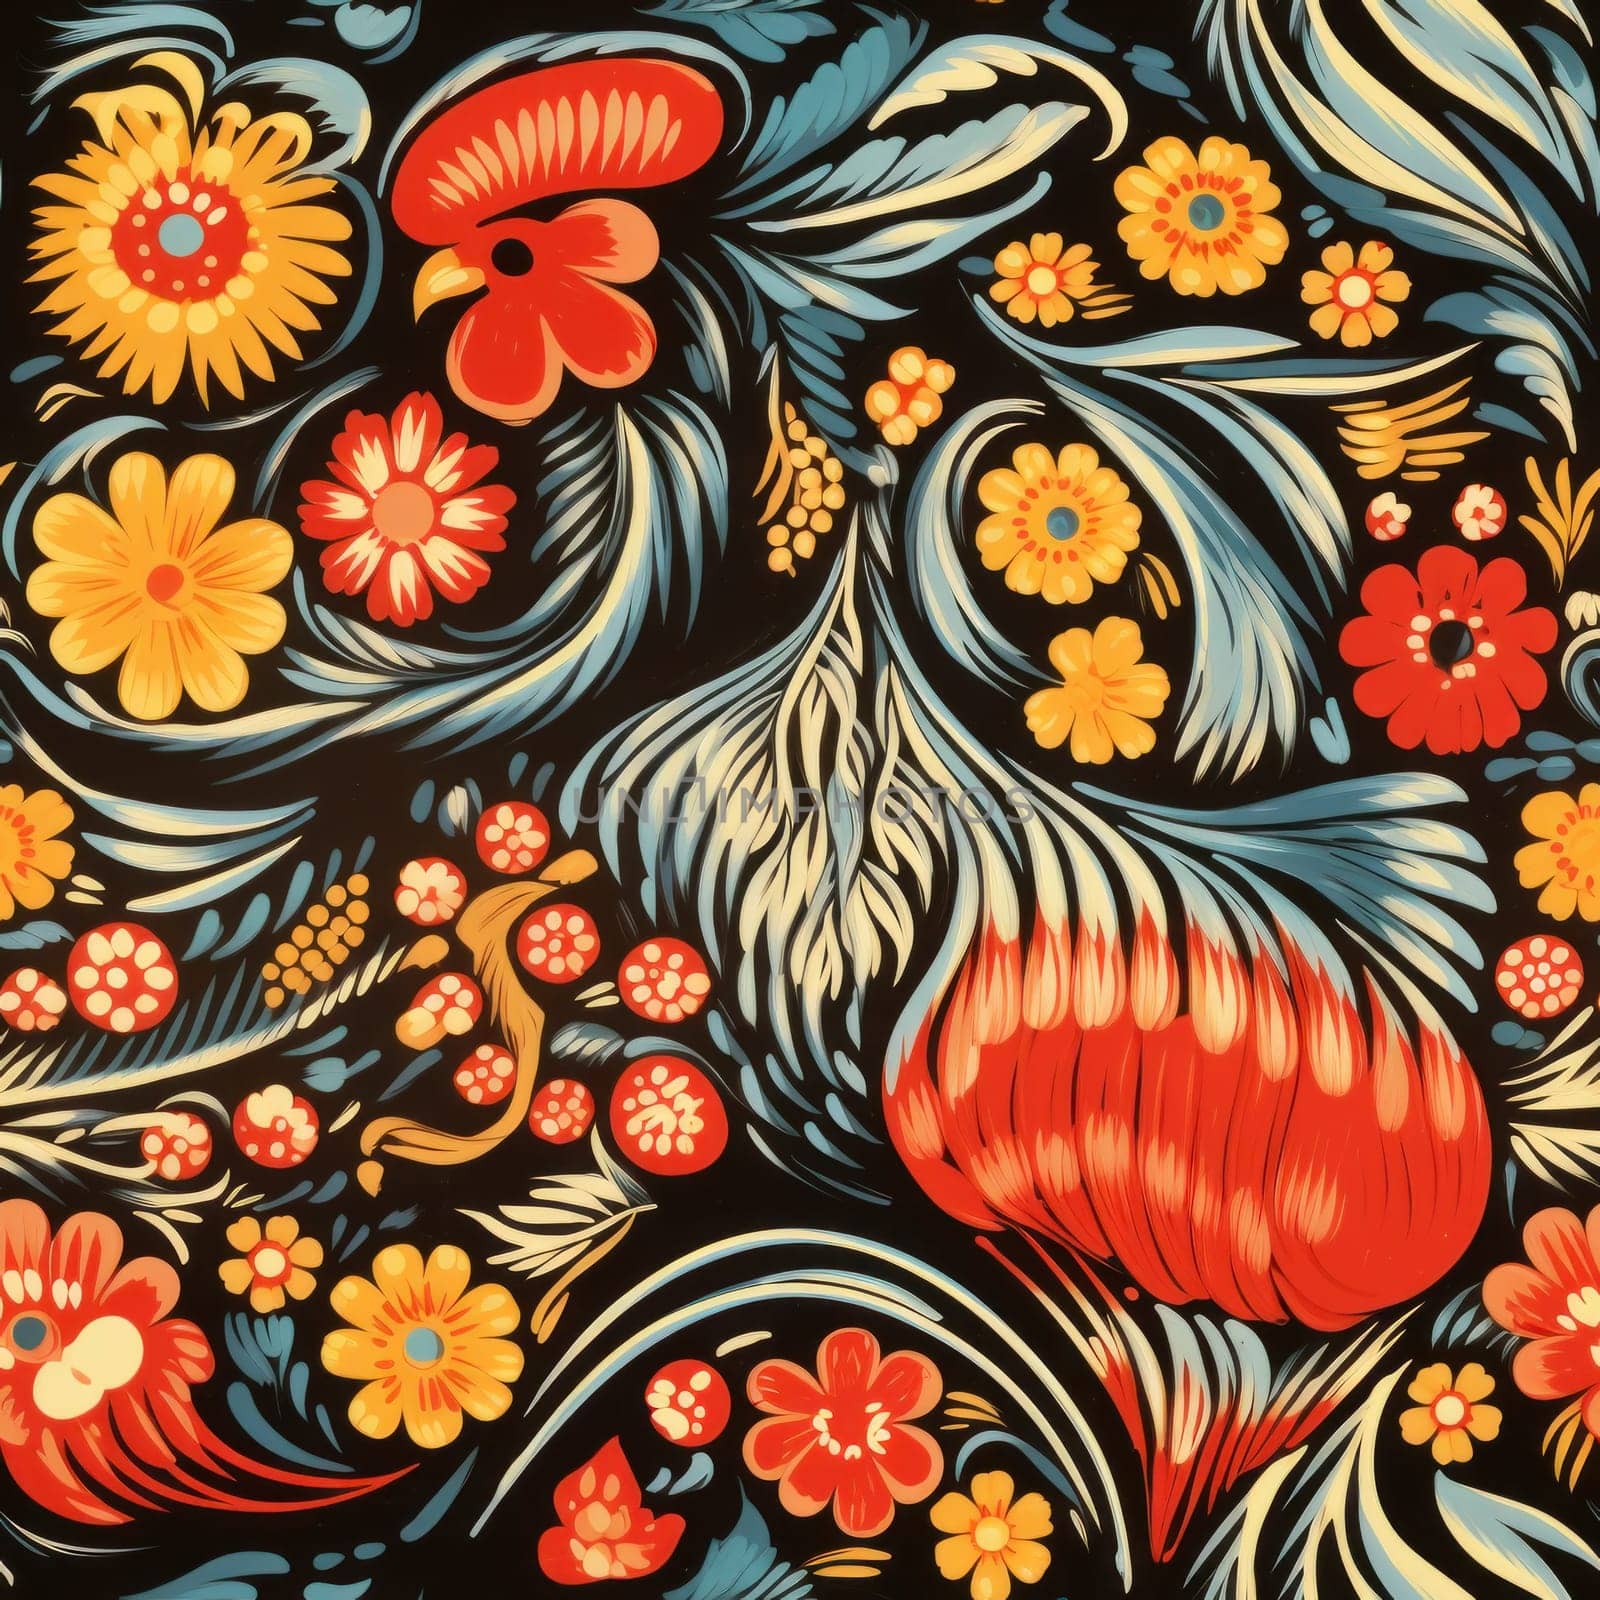 A colorful pattern with flowers and a rooster on it